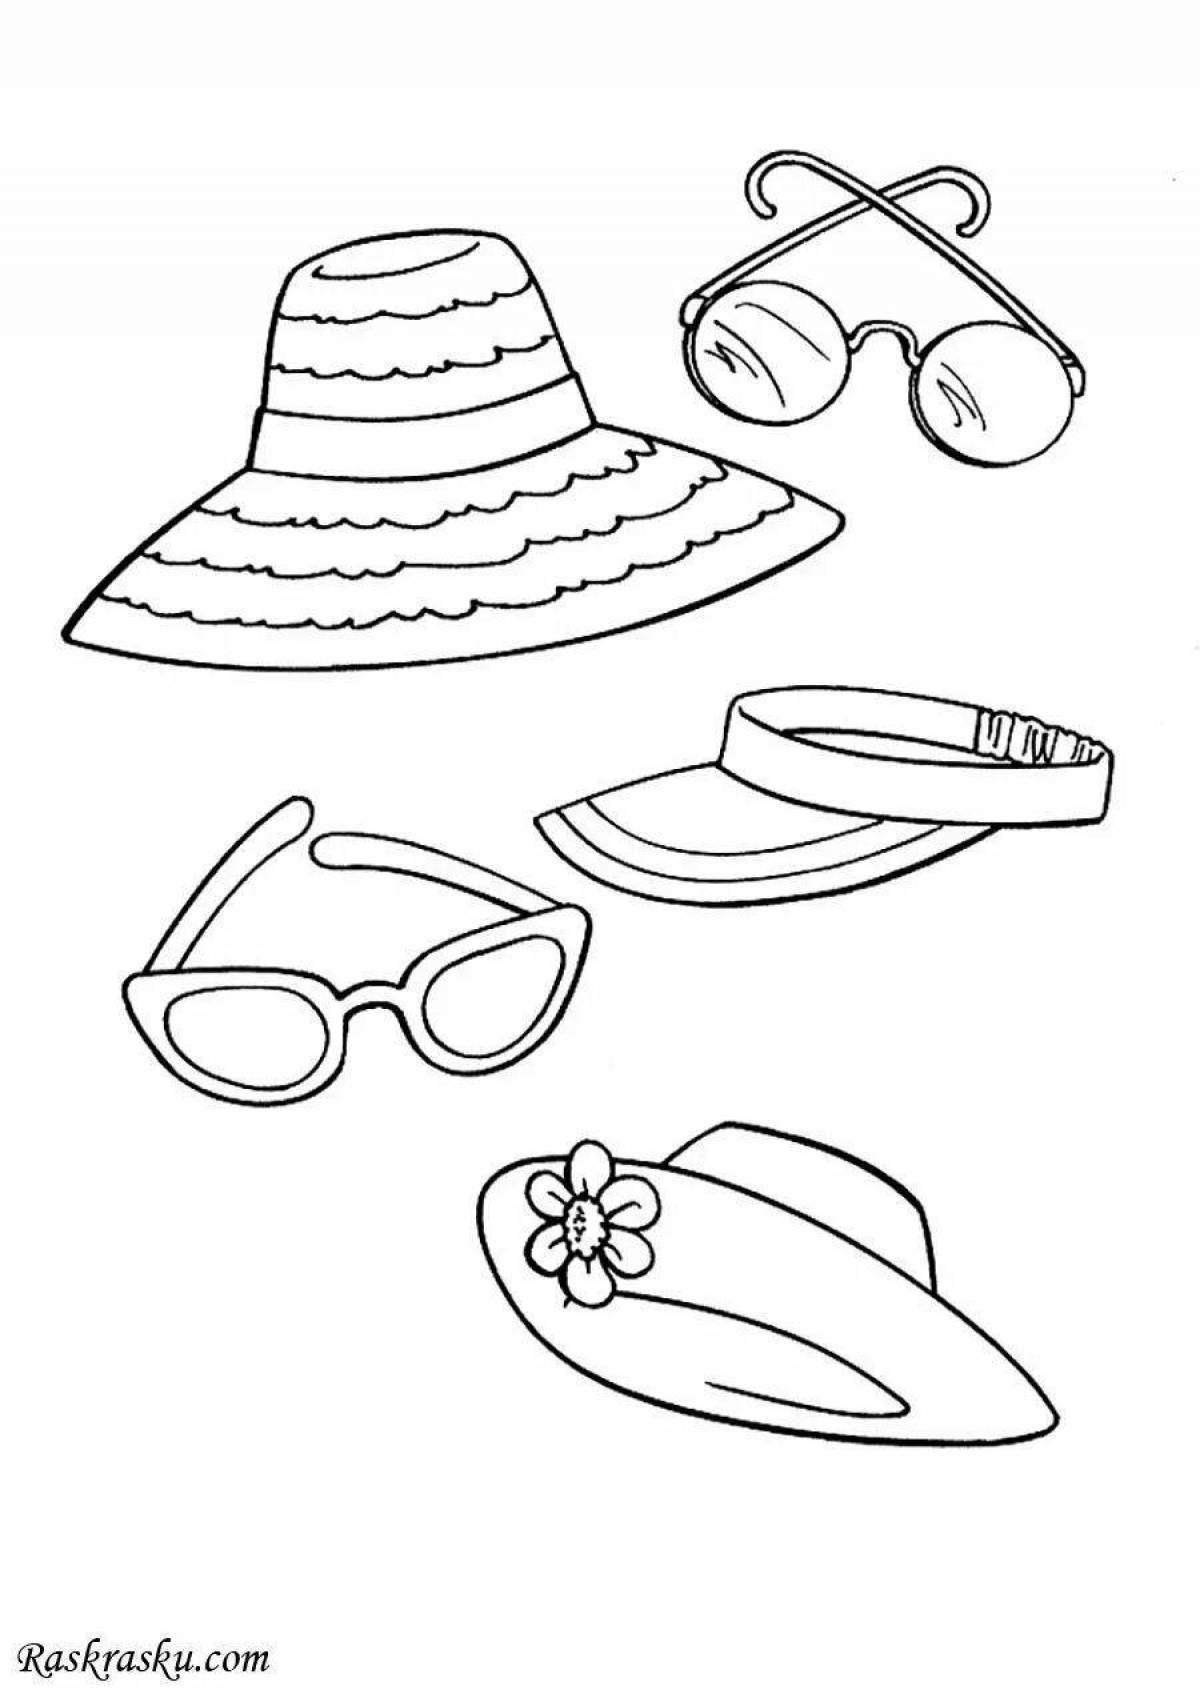 Exciting coloring pages for kids